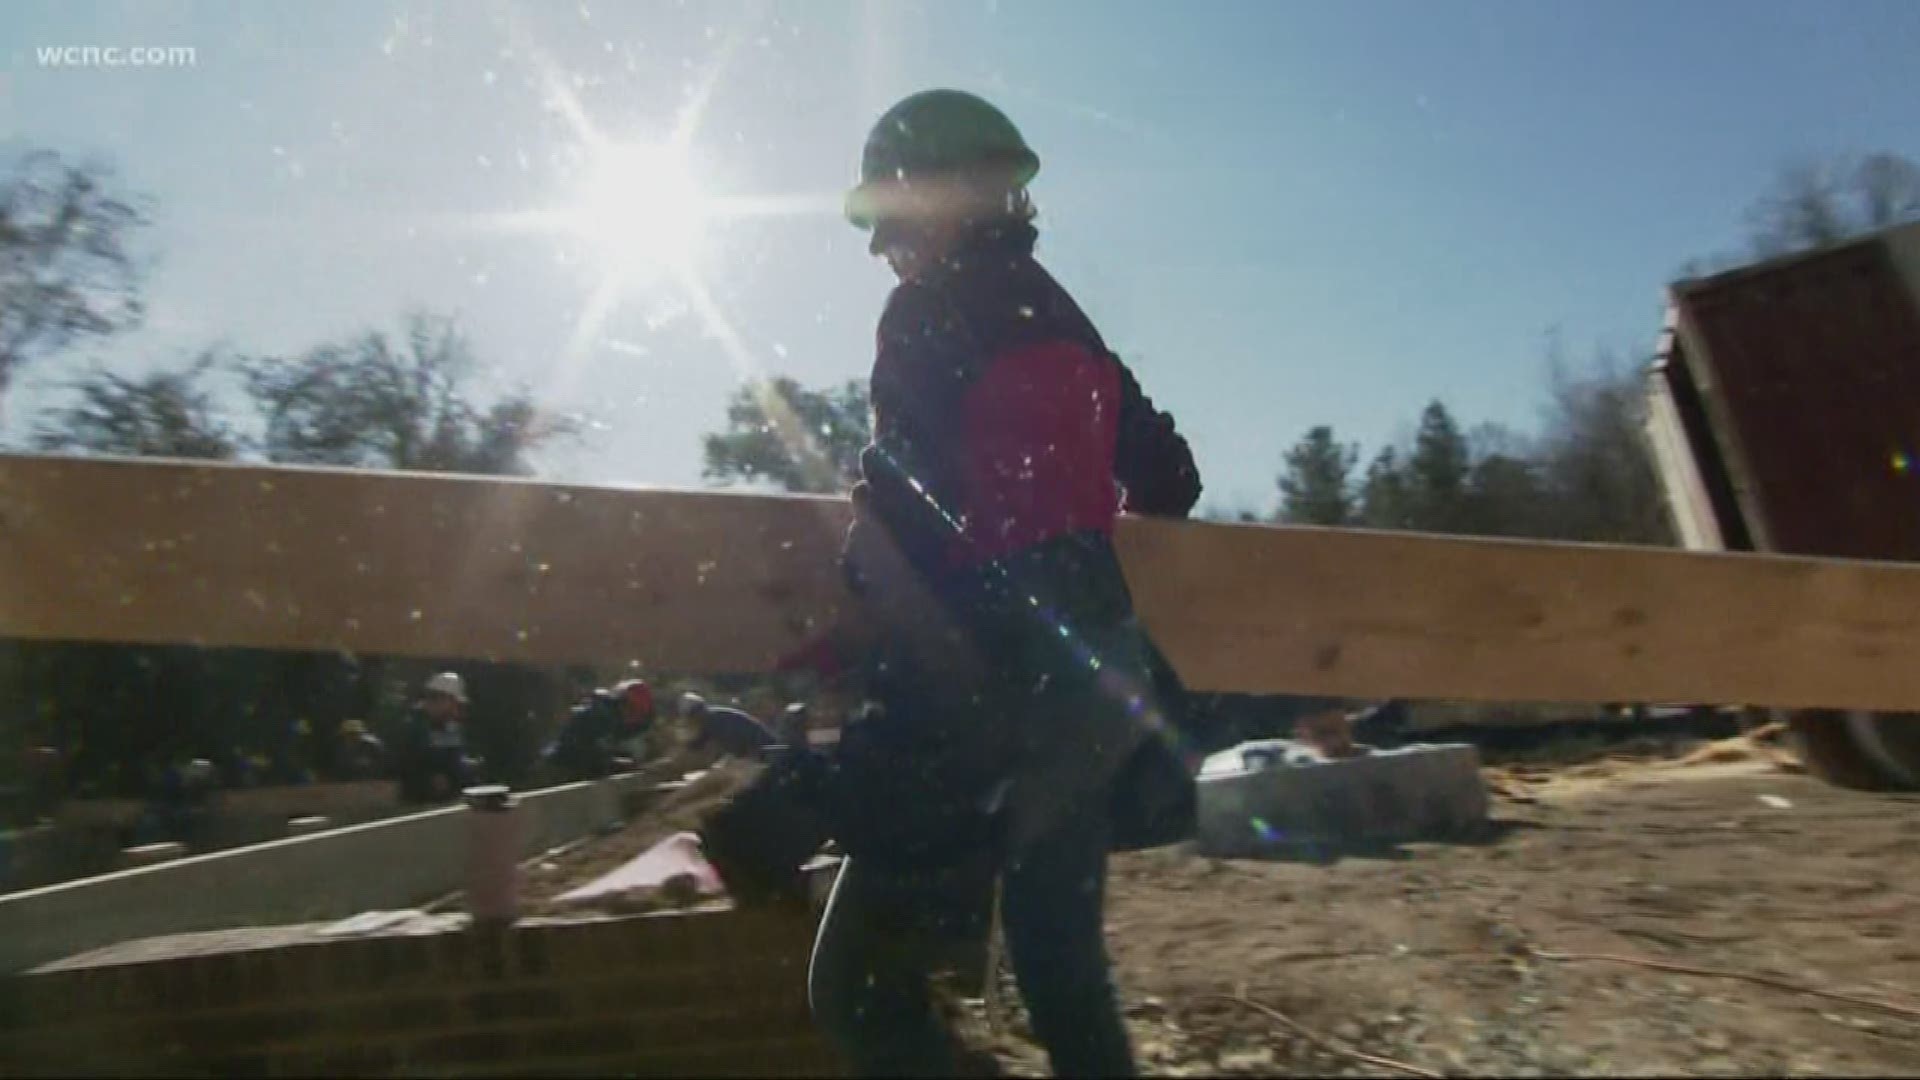 NBC Charlotte teamed up with Habitat for Humanity Thursday to help construct a home for a veteran in west Charlotte.